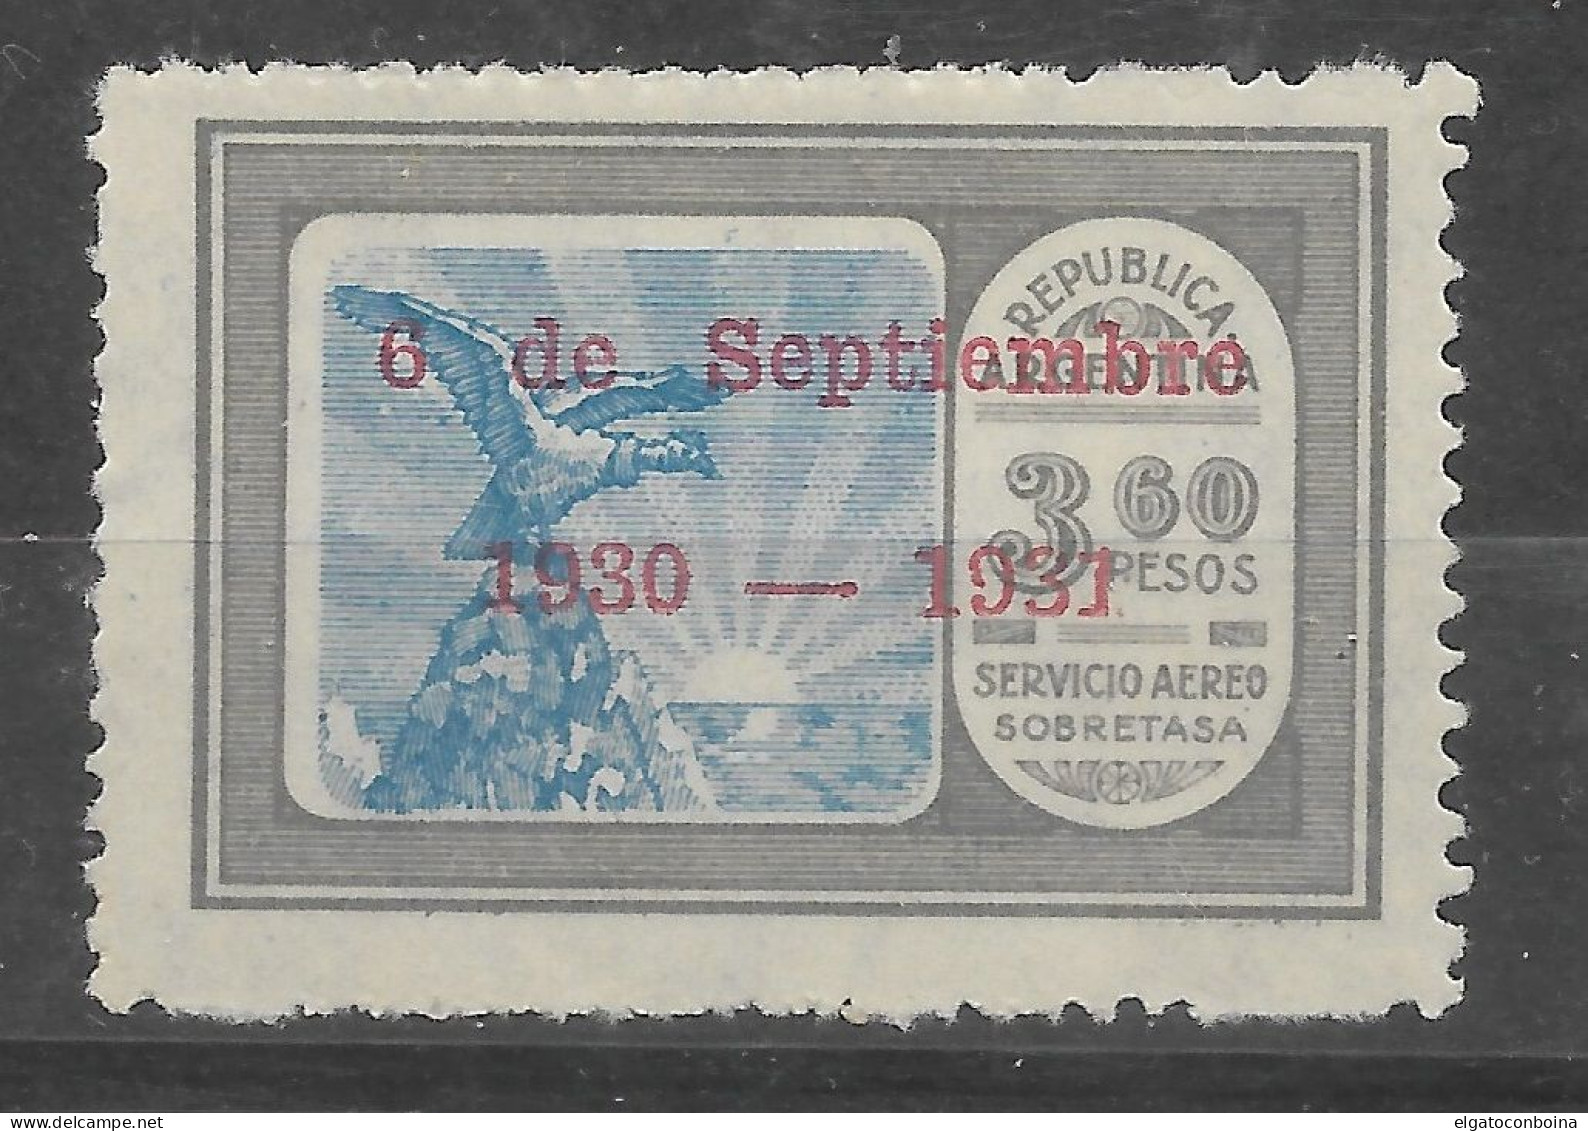 ARGENTINA 1931 EAGLE MOUNTAIN AIRMAIL OVERPRINTED STAMP C34 MI 383 MNH - Neufs